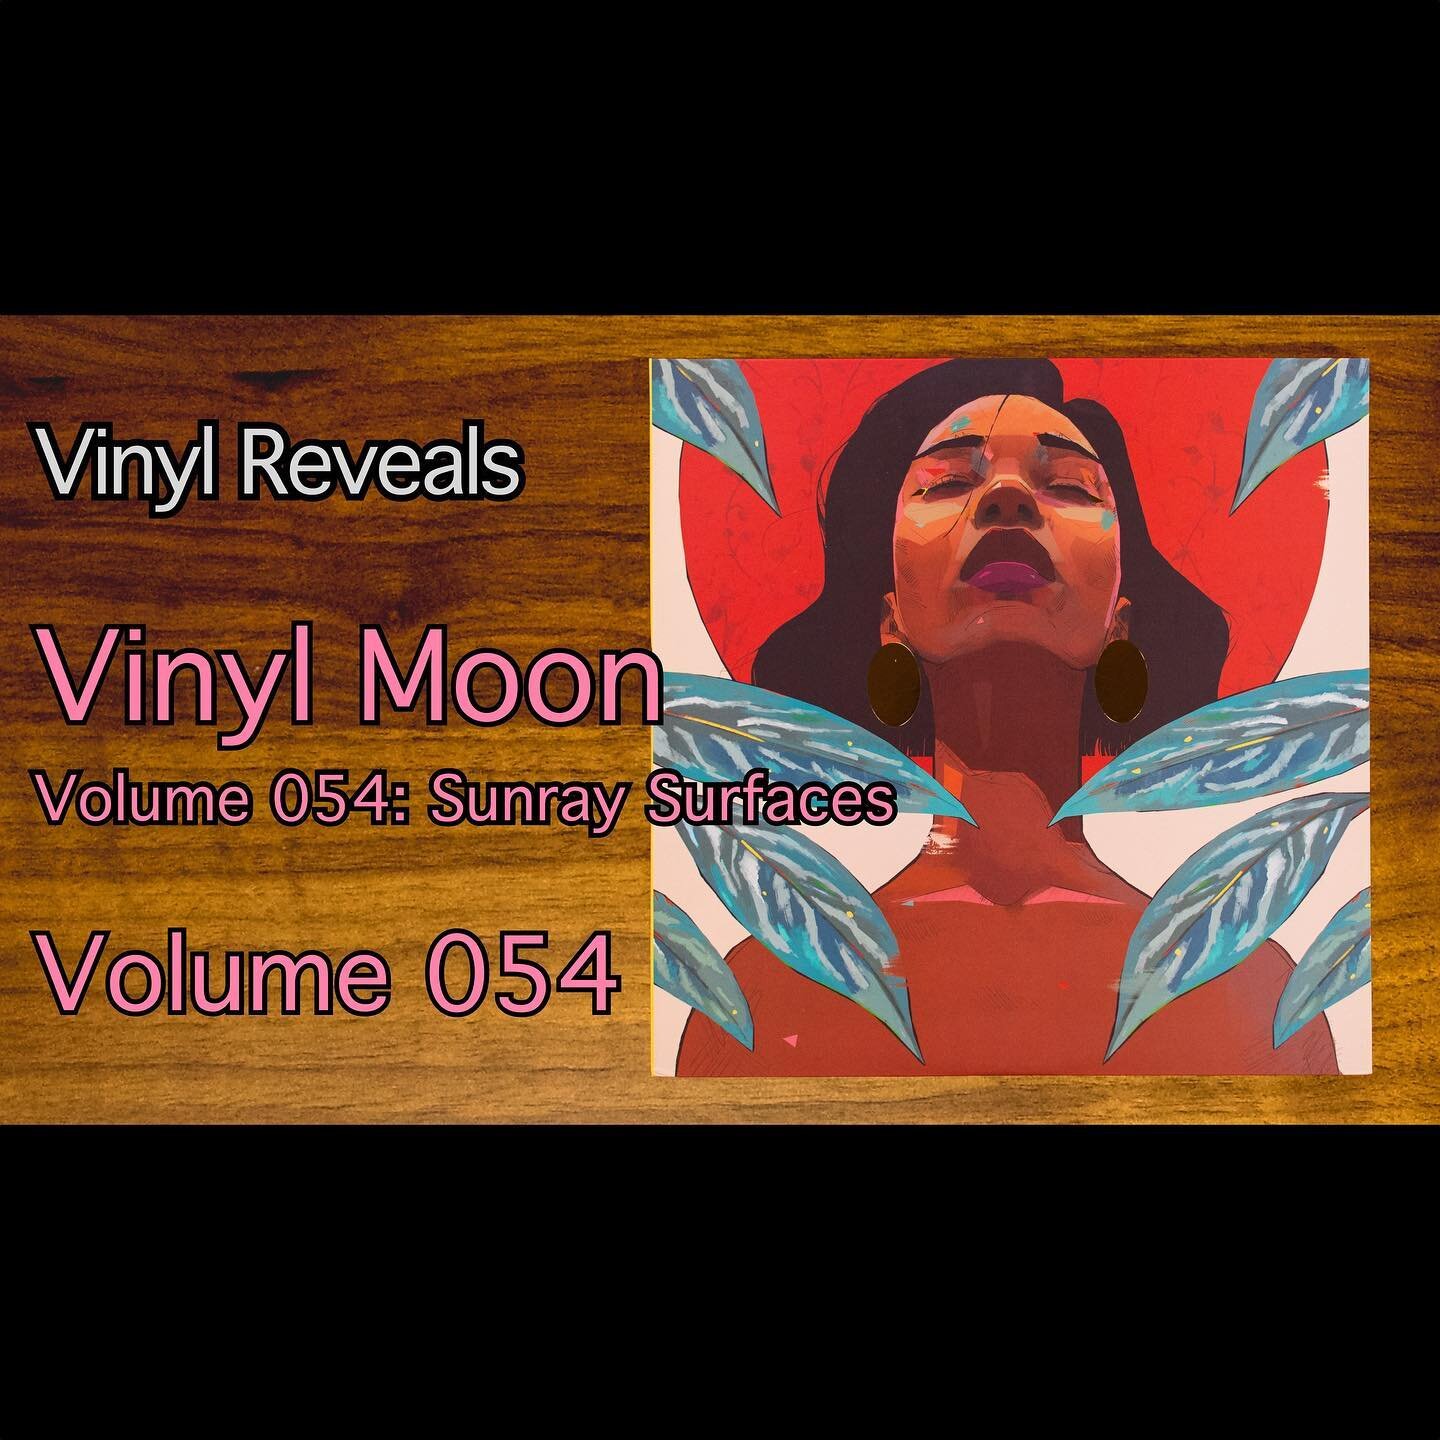 Today we are looking at Vinyl Moon Volume 054: Sunray Surfaces. Video is now live on the Vinyl Reveals YouTube channel. Link in profile.

#vinylReveal #vinyl #vinylcollection #vinylrecords #records #vinylReveals #vinylcommunity @vinylmoonco #vinylmoo